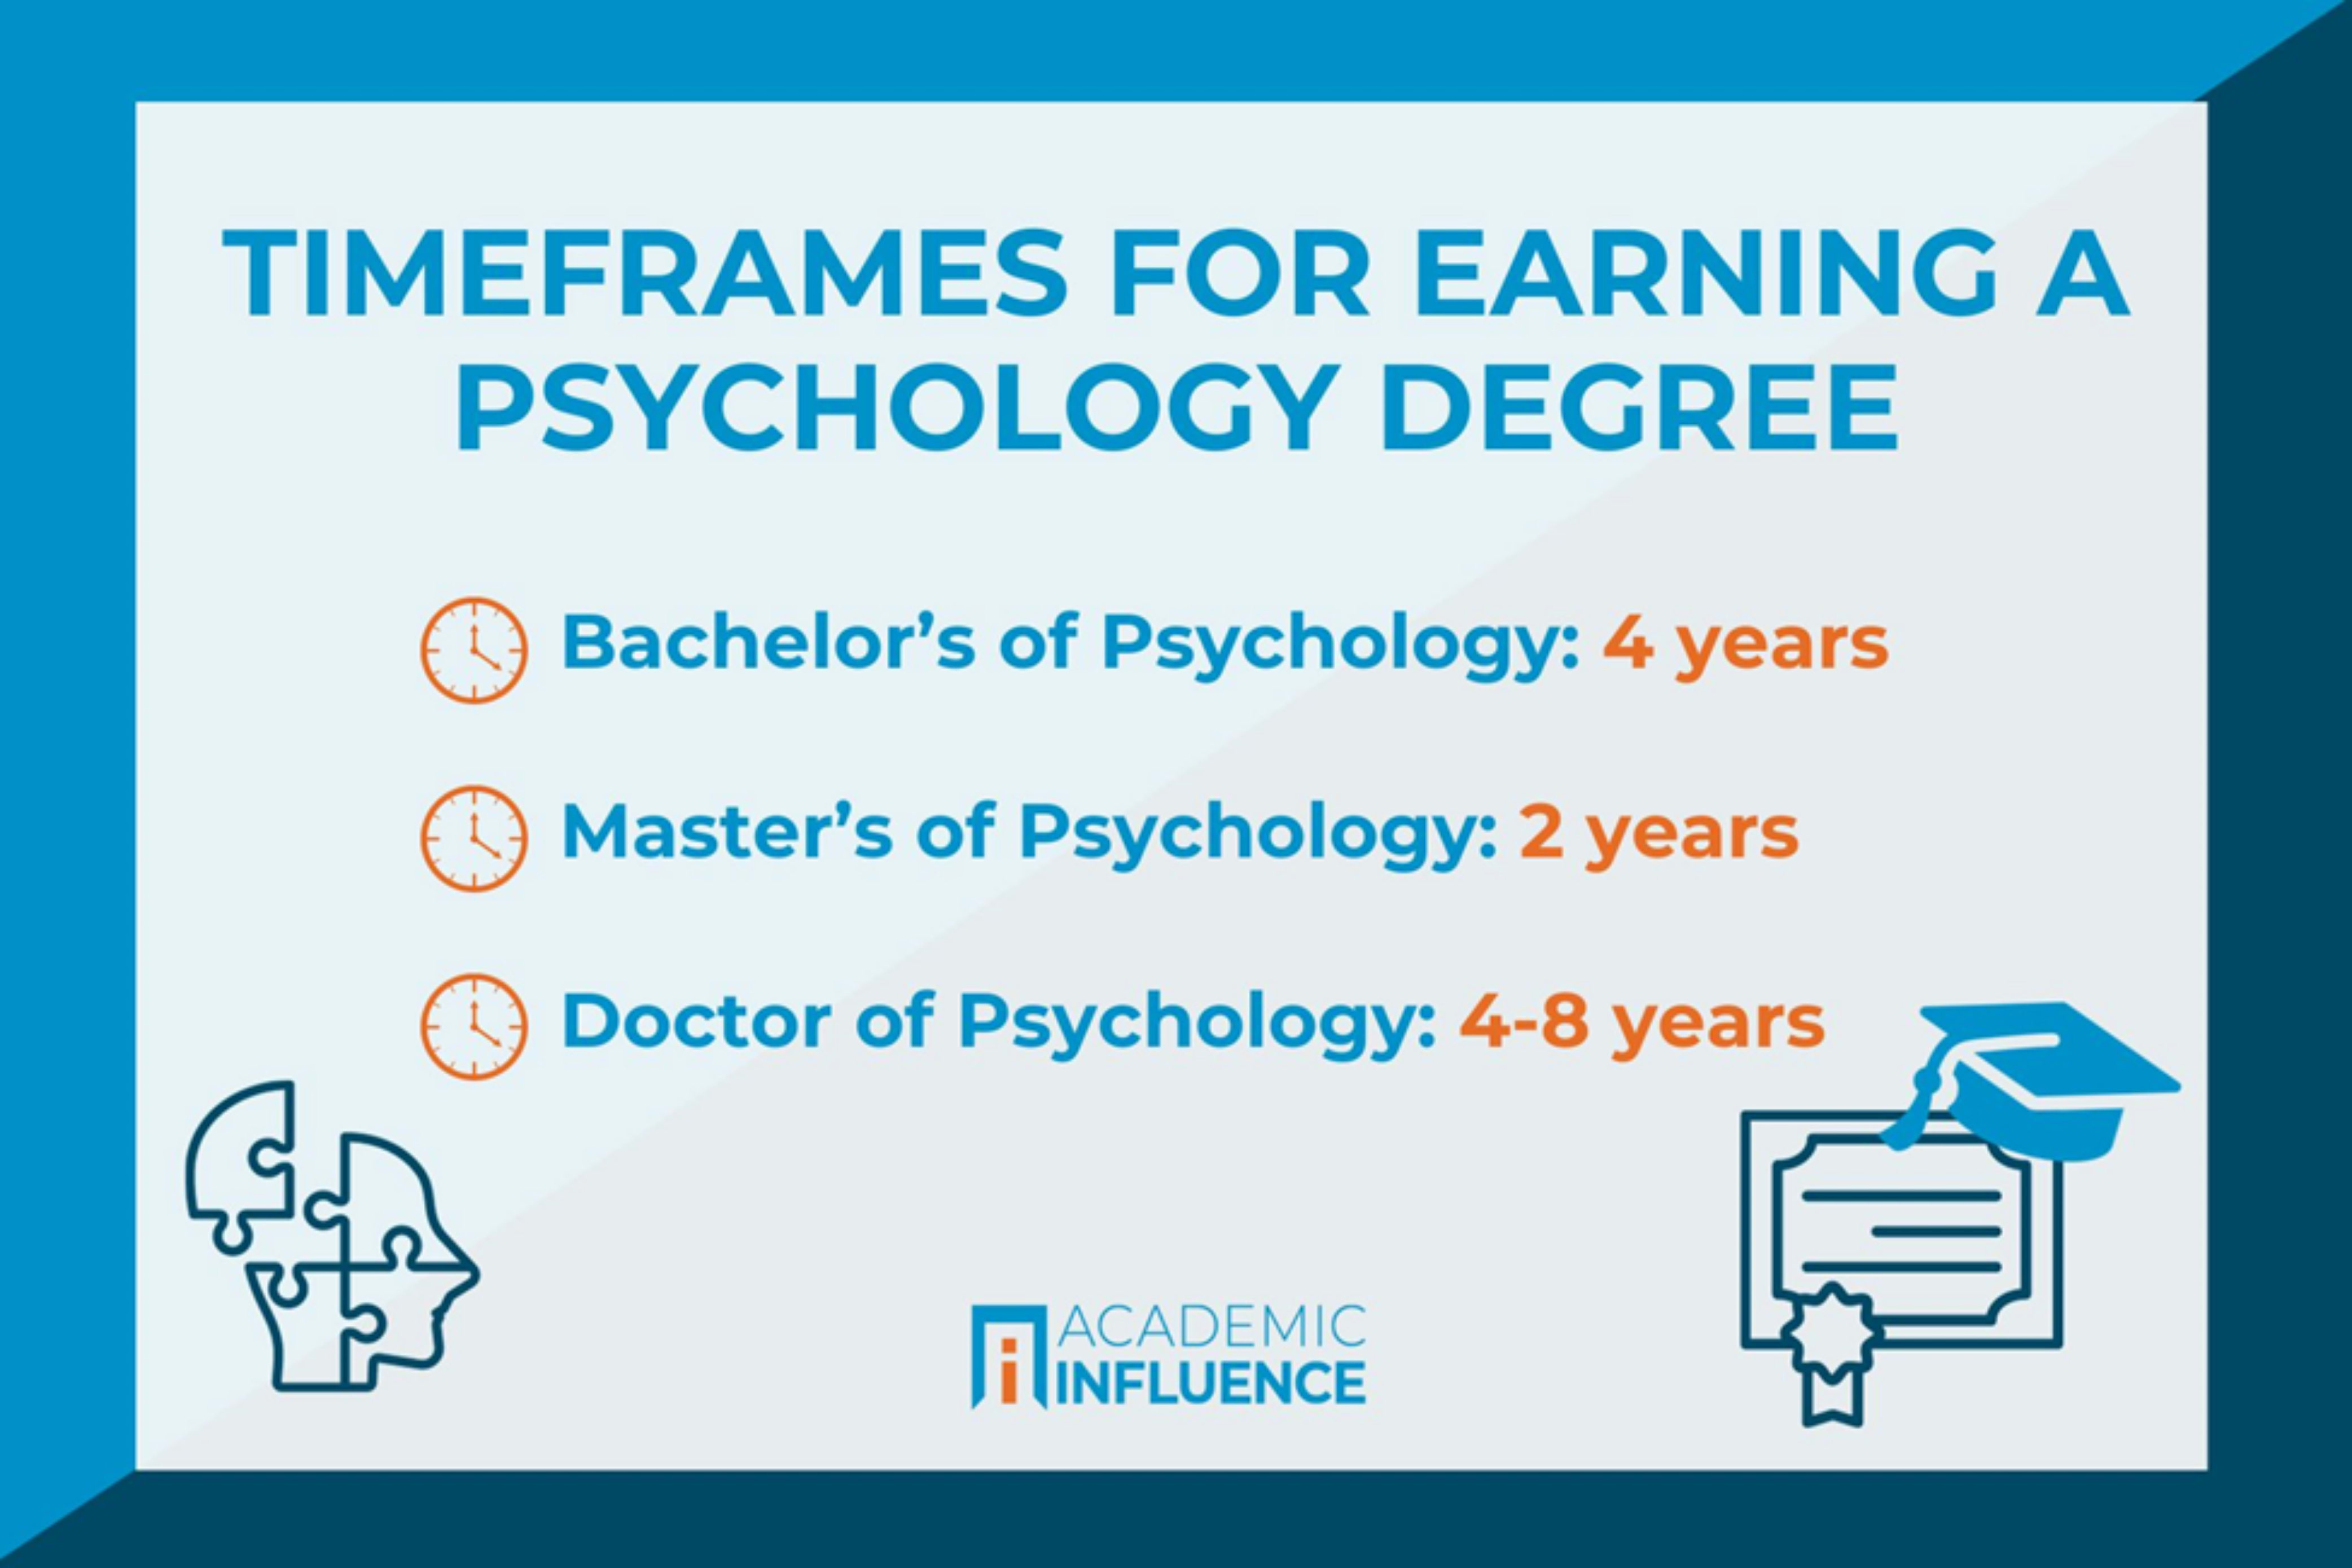 timframe for earning a psychology degree infographic